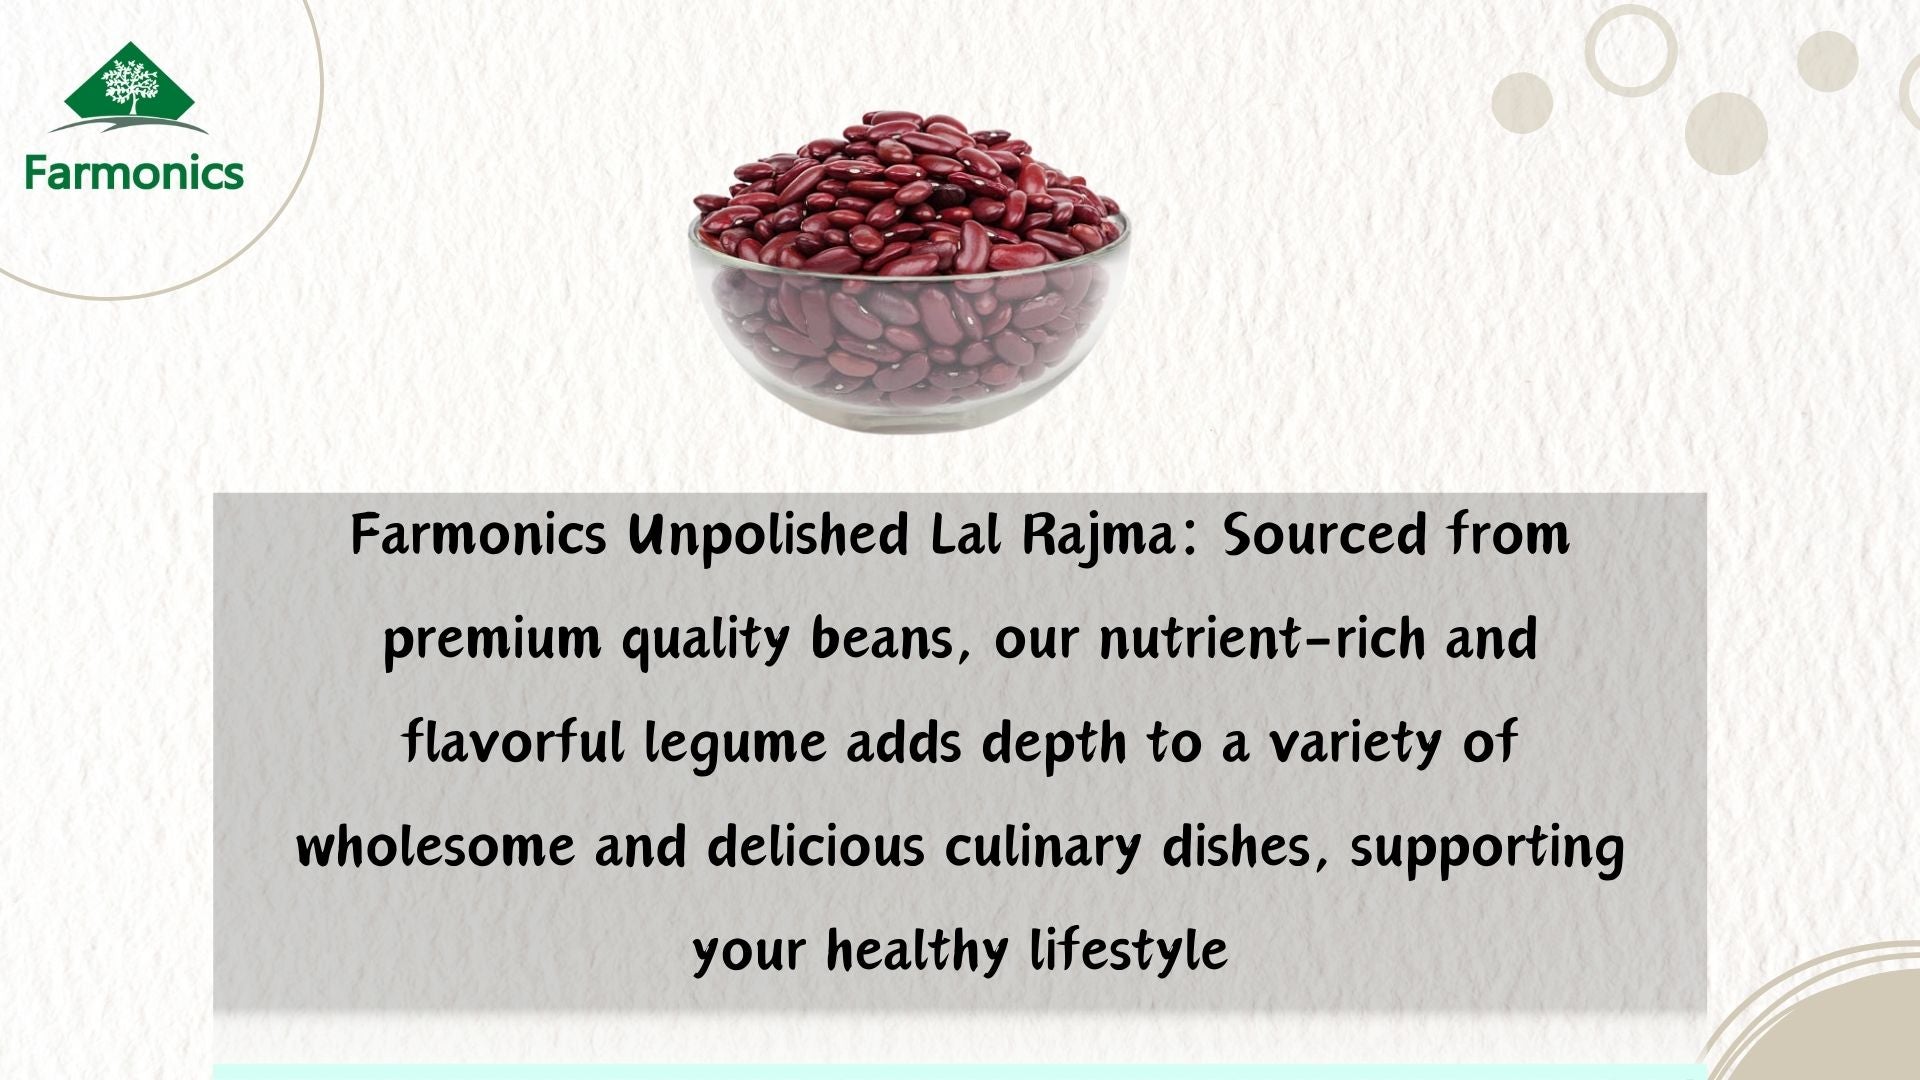 Here are some of the information about Farmonics best quality lal rajma 